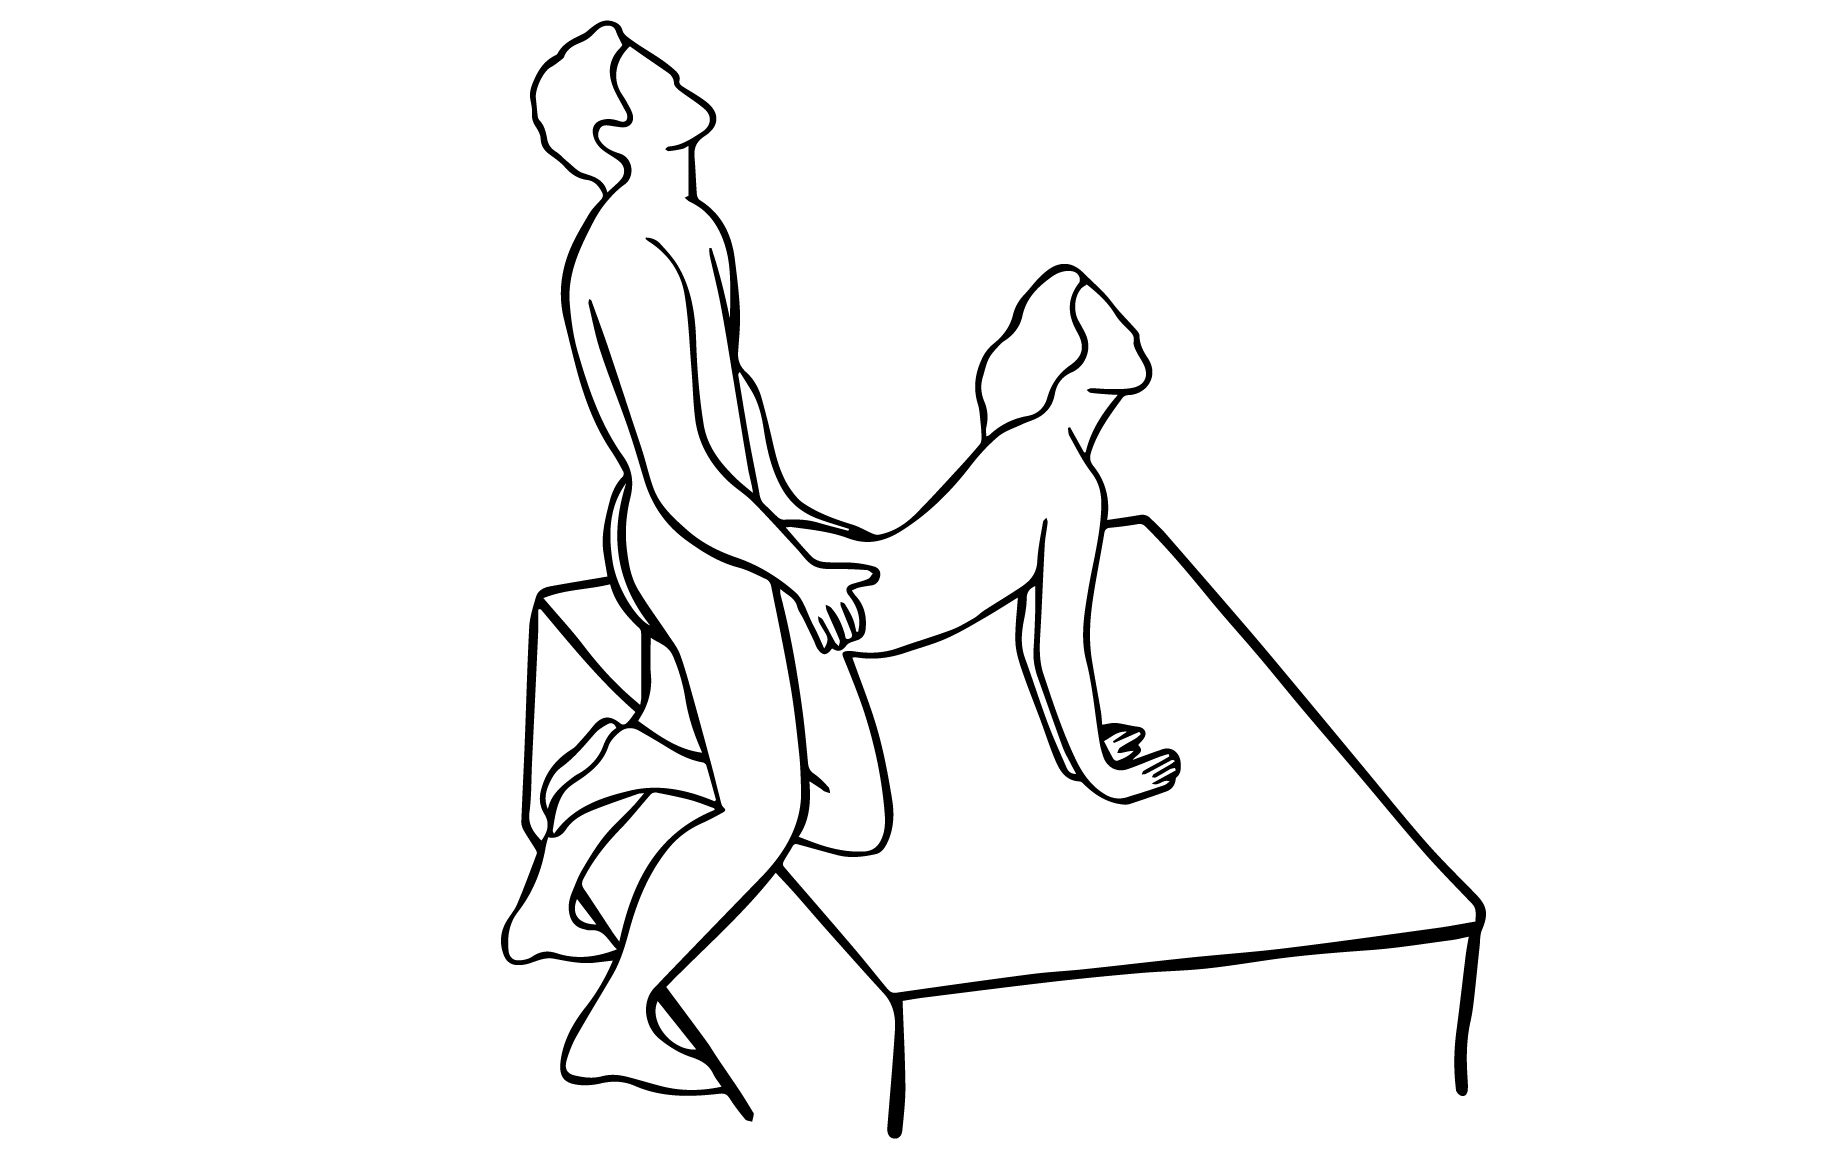 Illustration of standing doggy style sex position